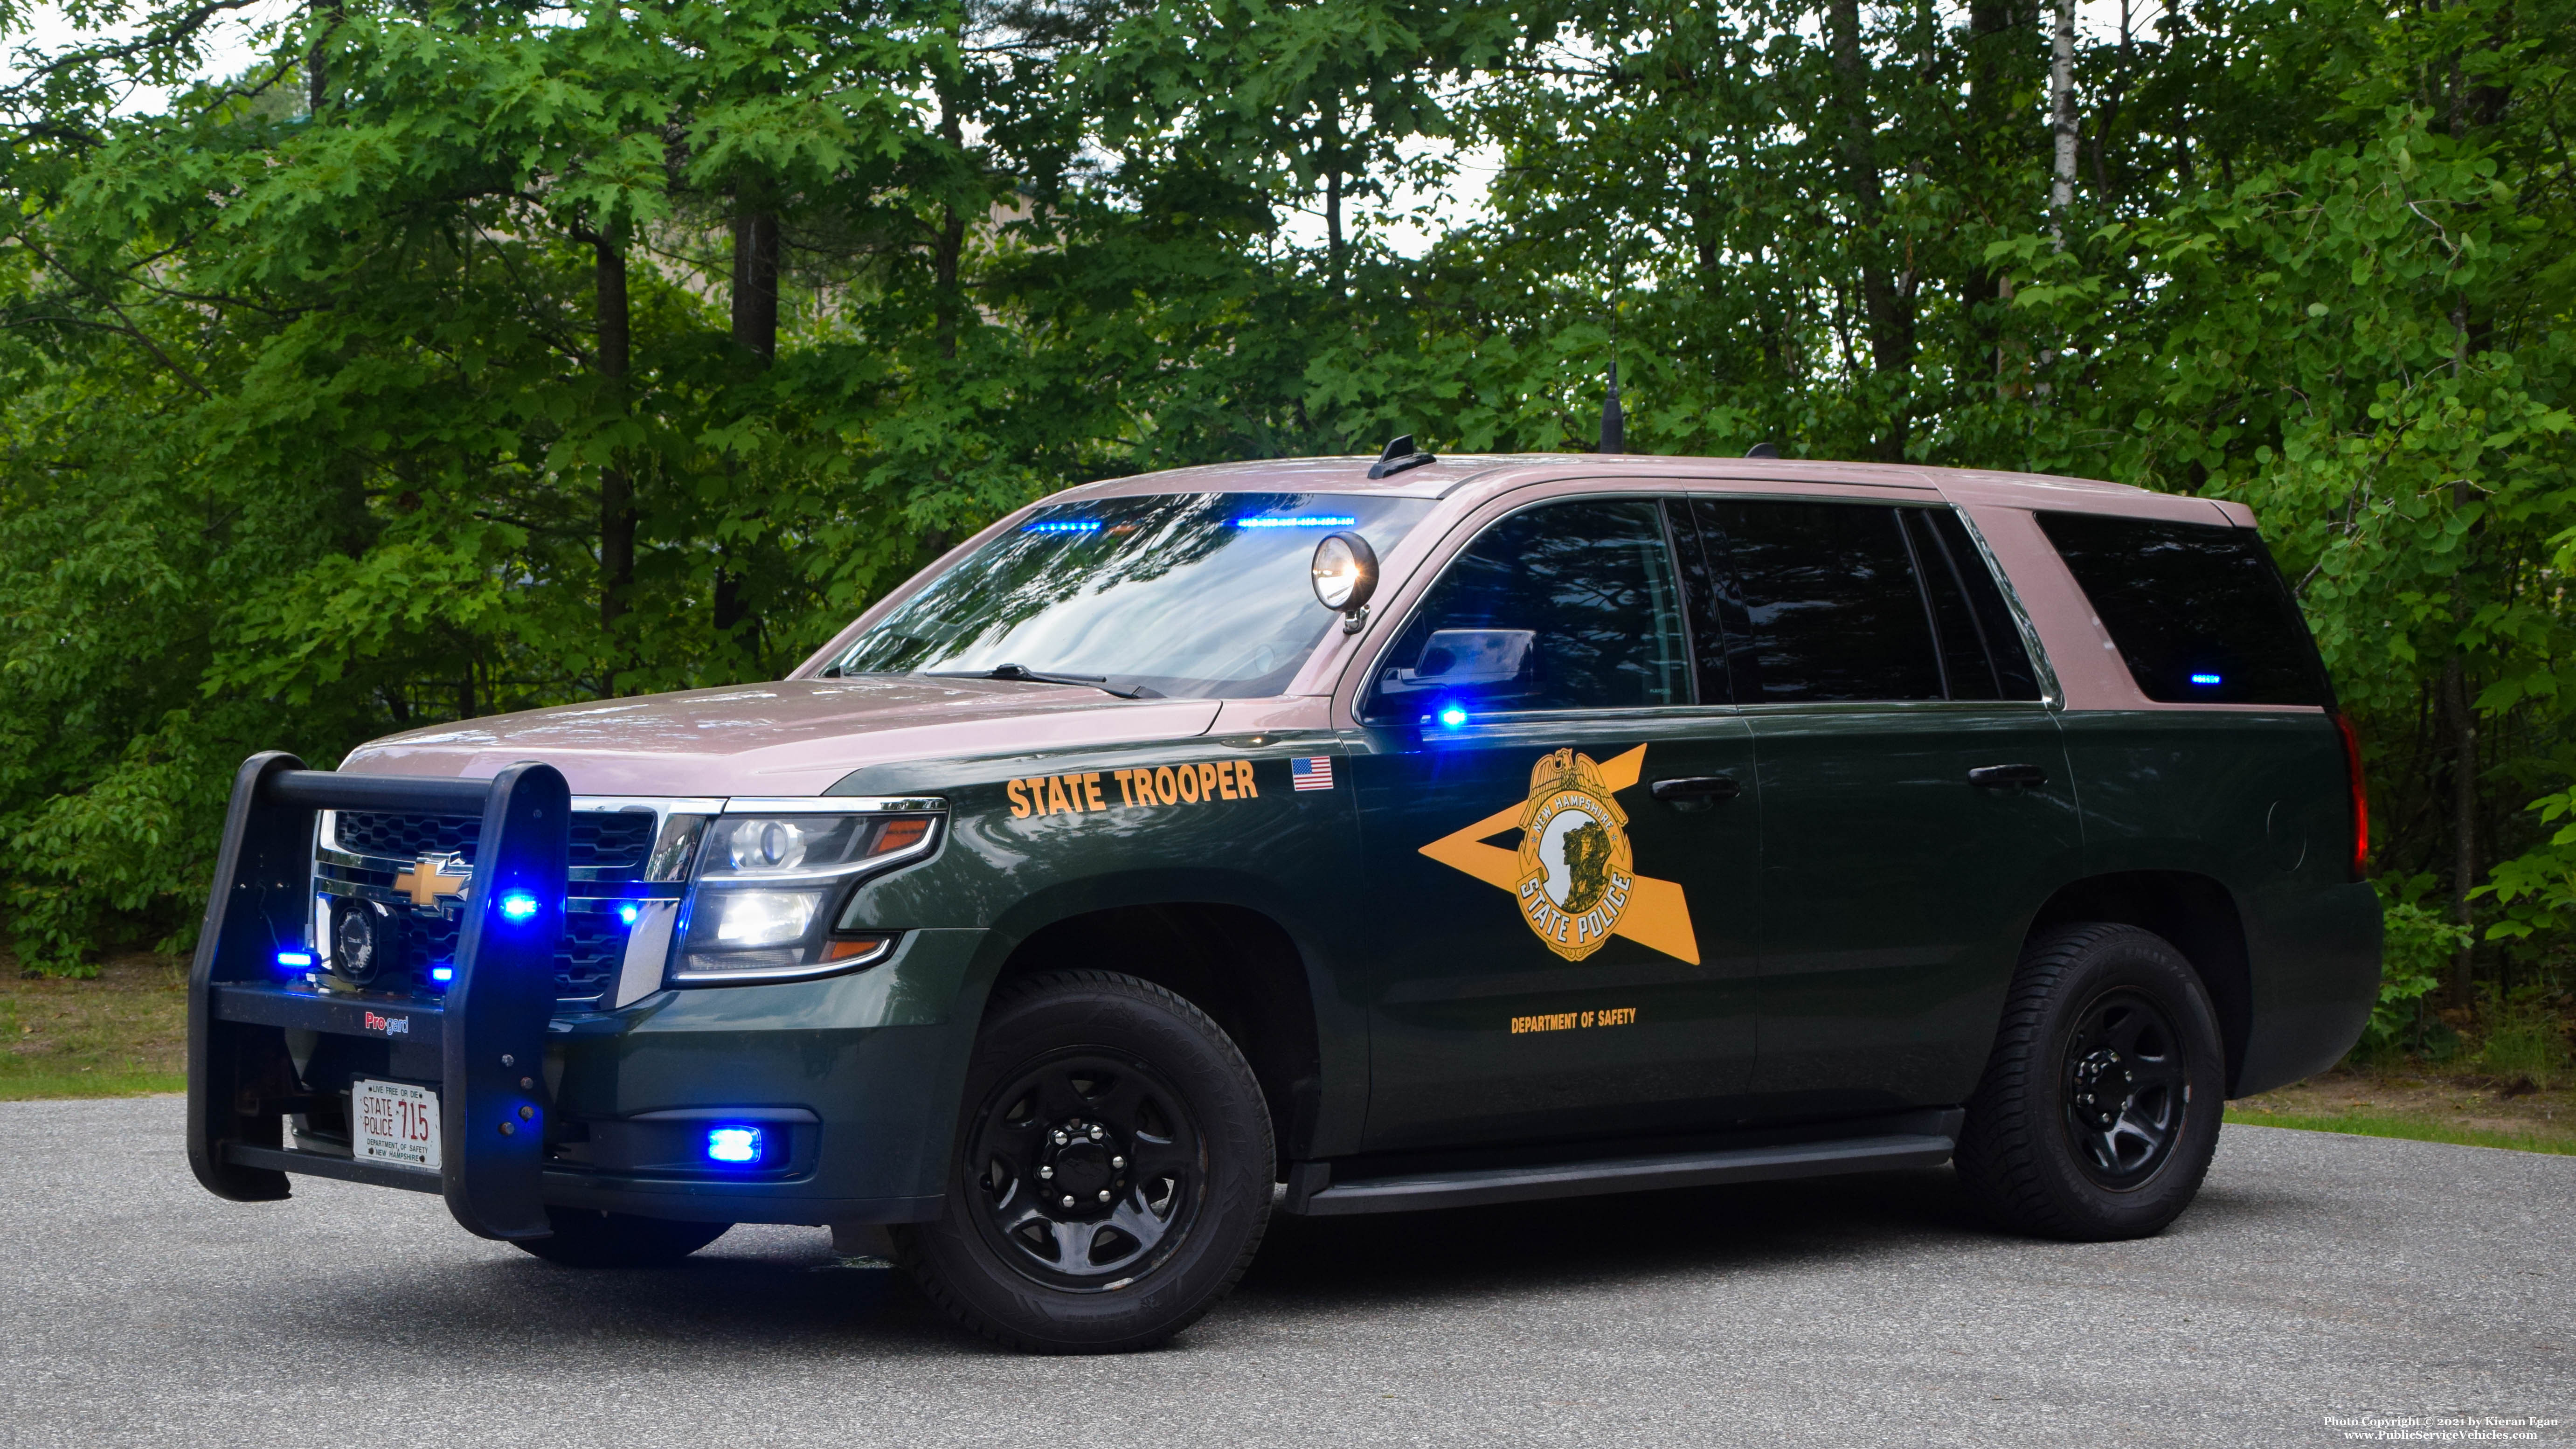 A photo  of New Hampshire State Police
            Cruiser 715, a 2017-2019 Chevrolet Tahoe             taken by Kieran Egan